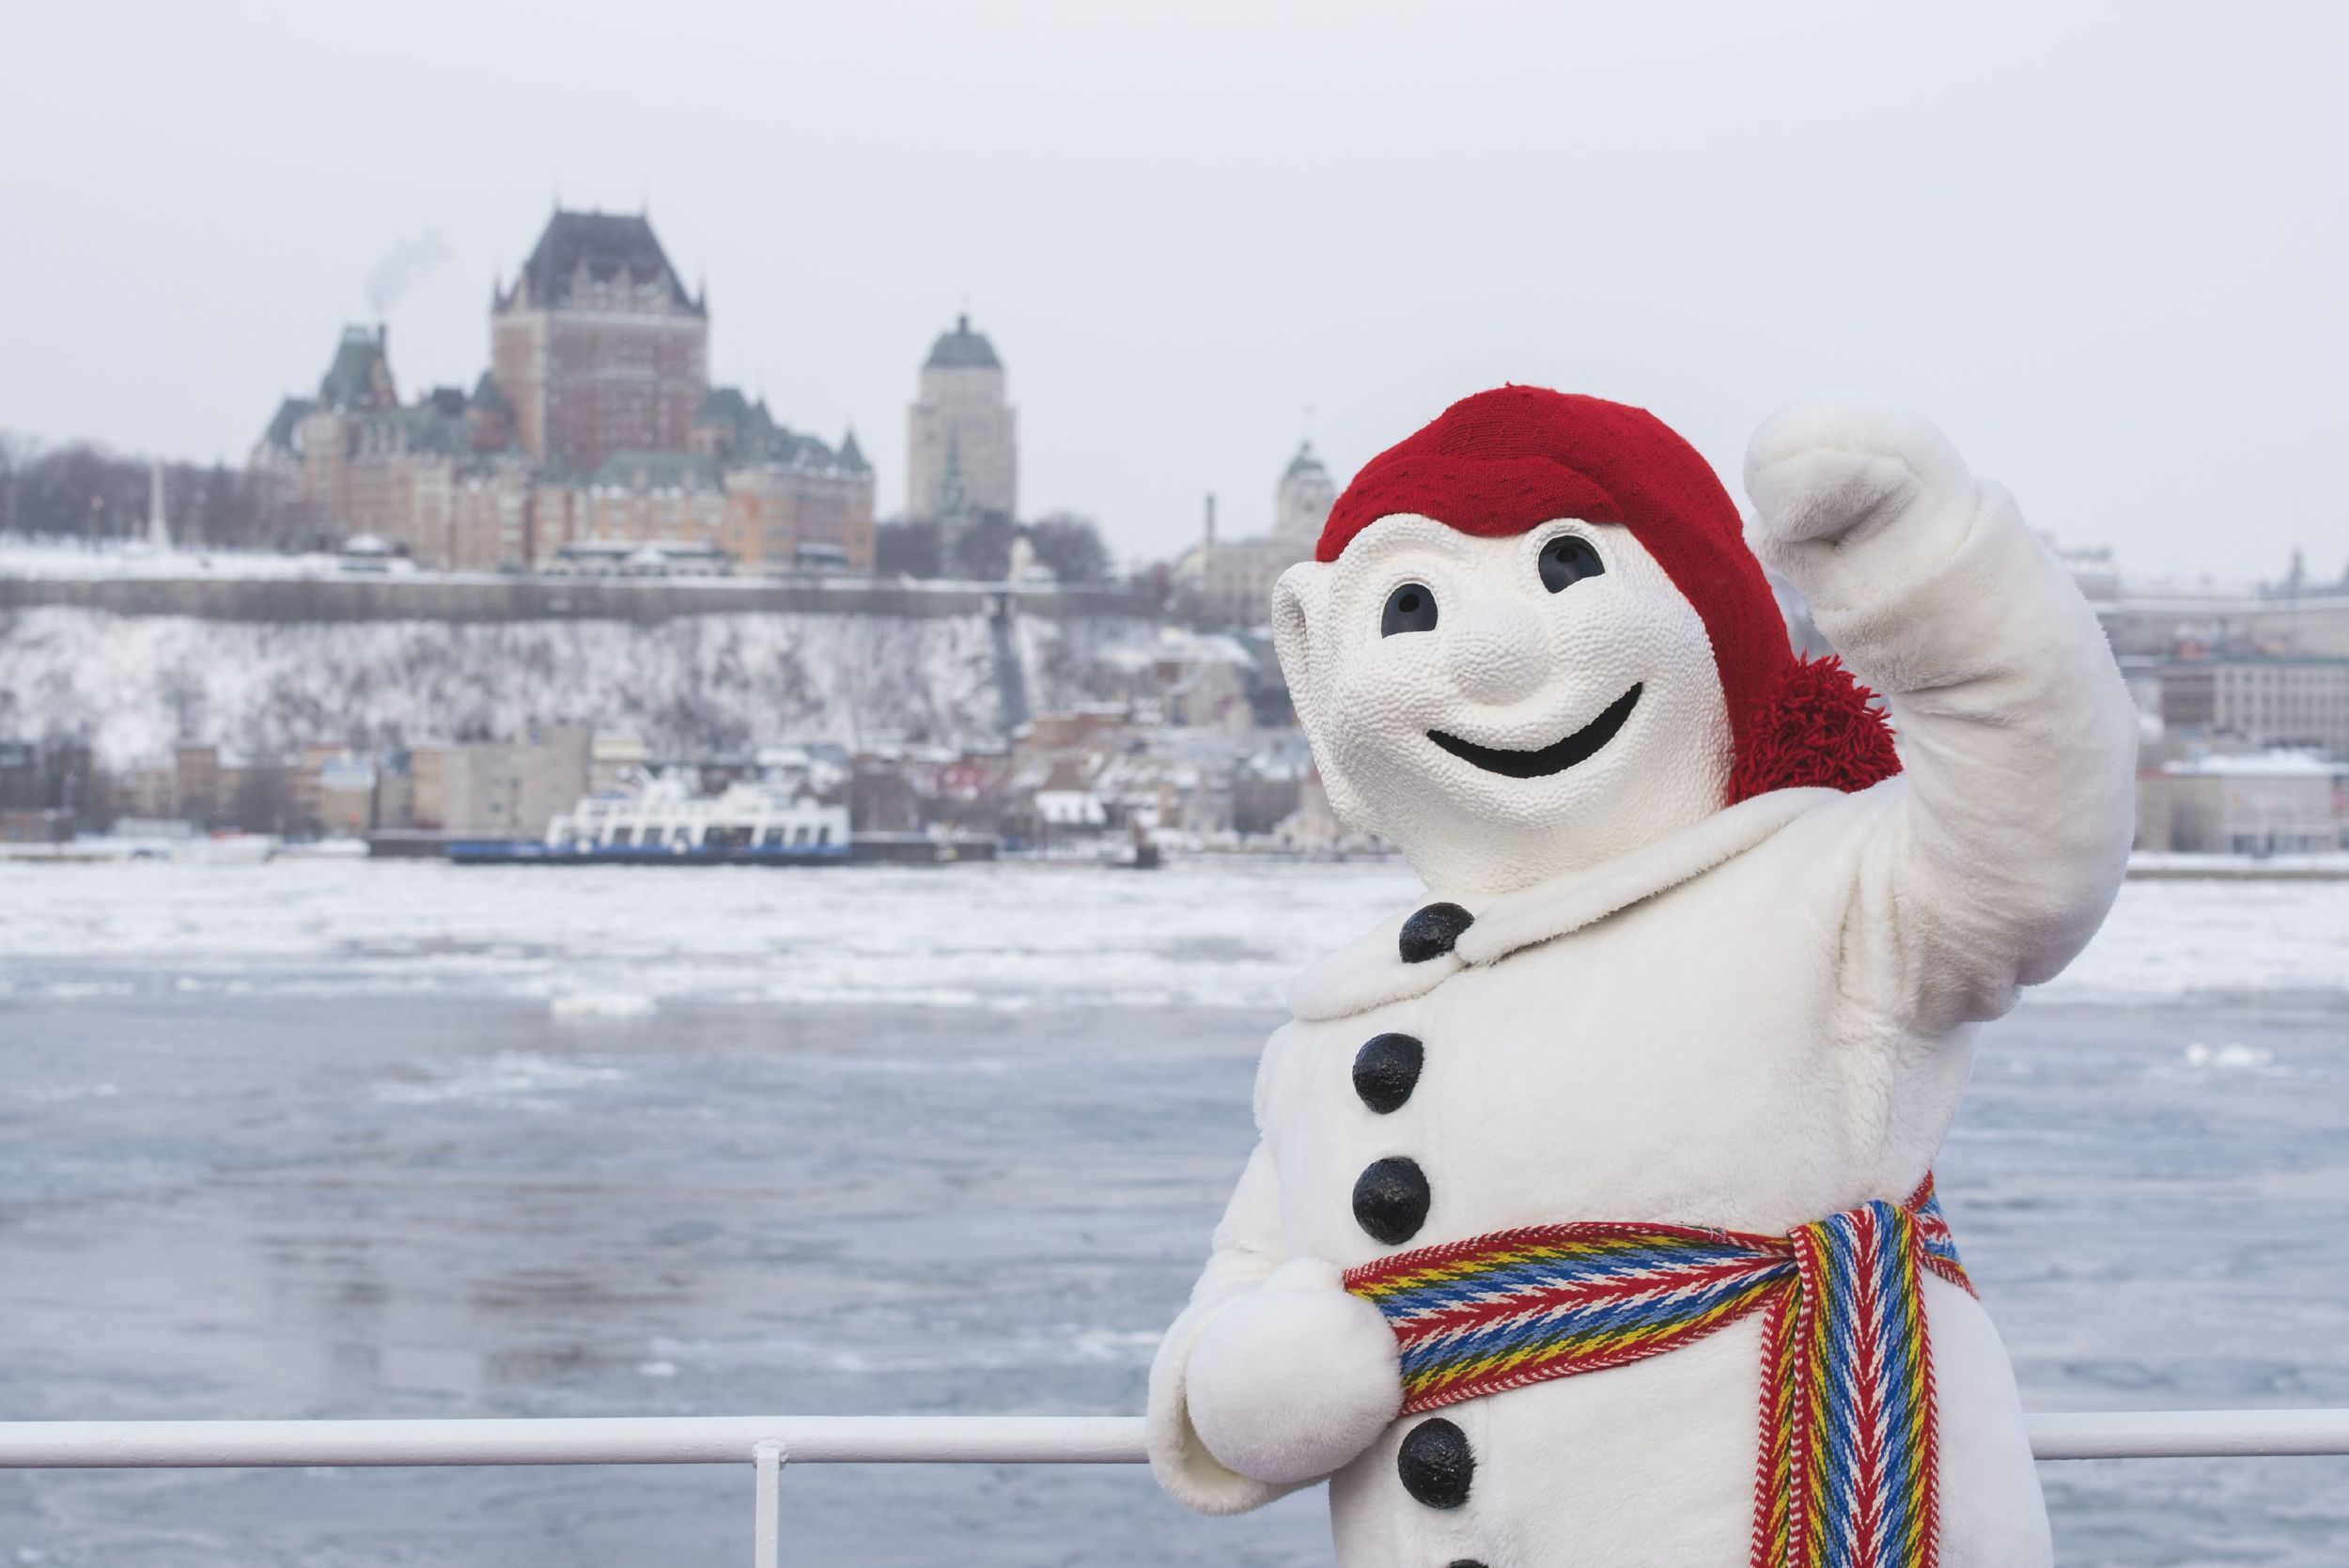 Say Bonjour to Bonhomme, the Quebec Winter Carnival mascot